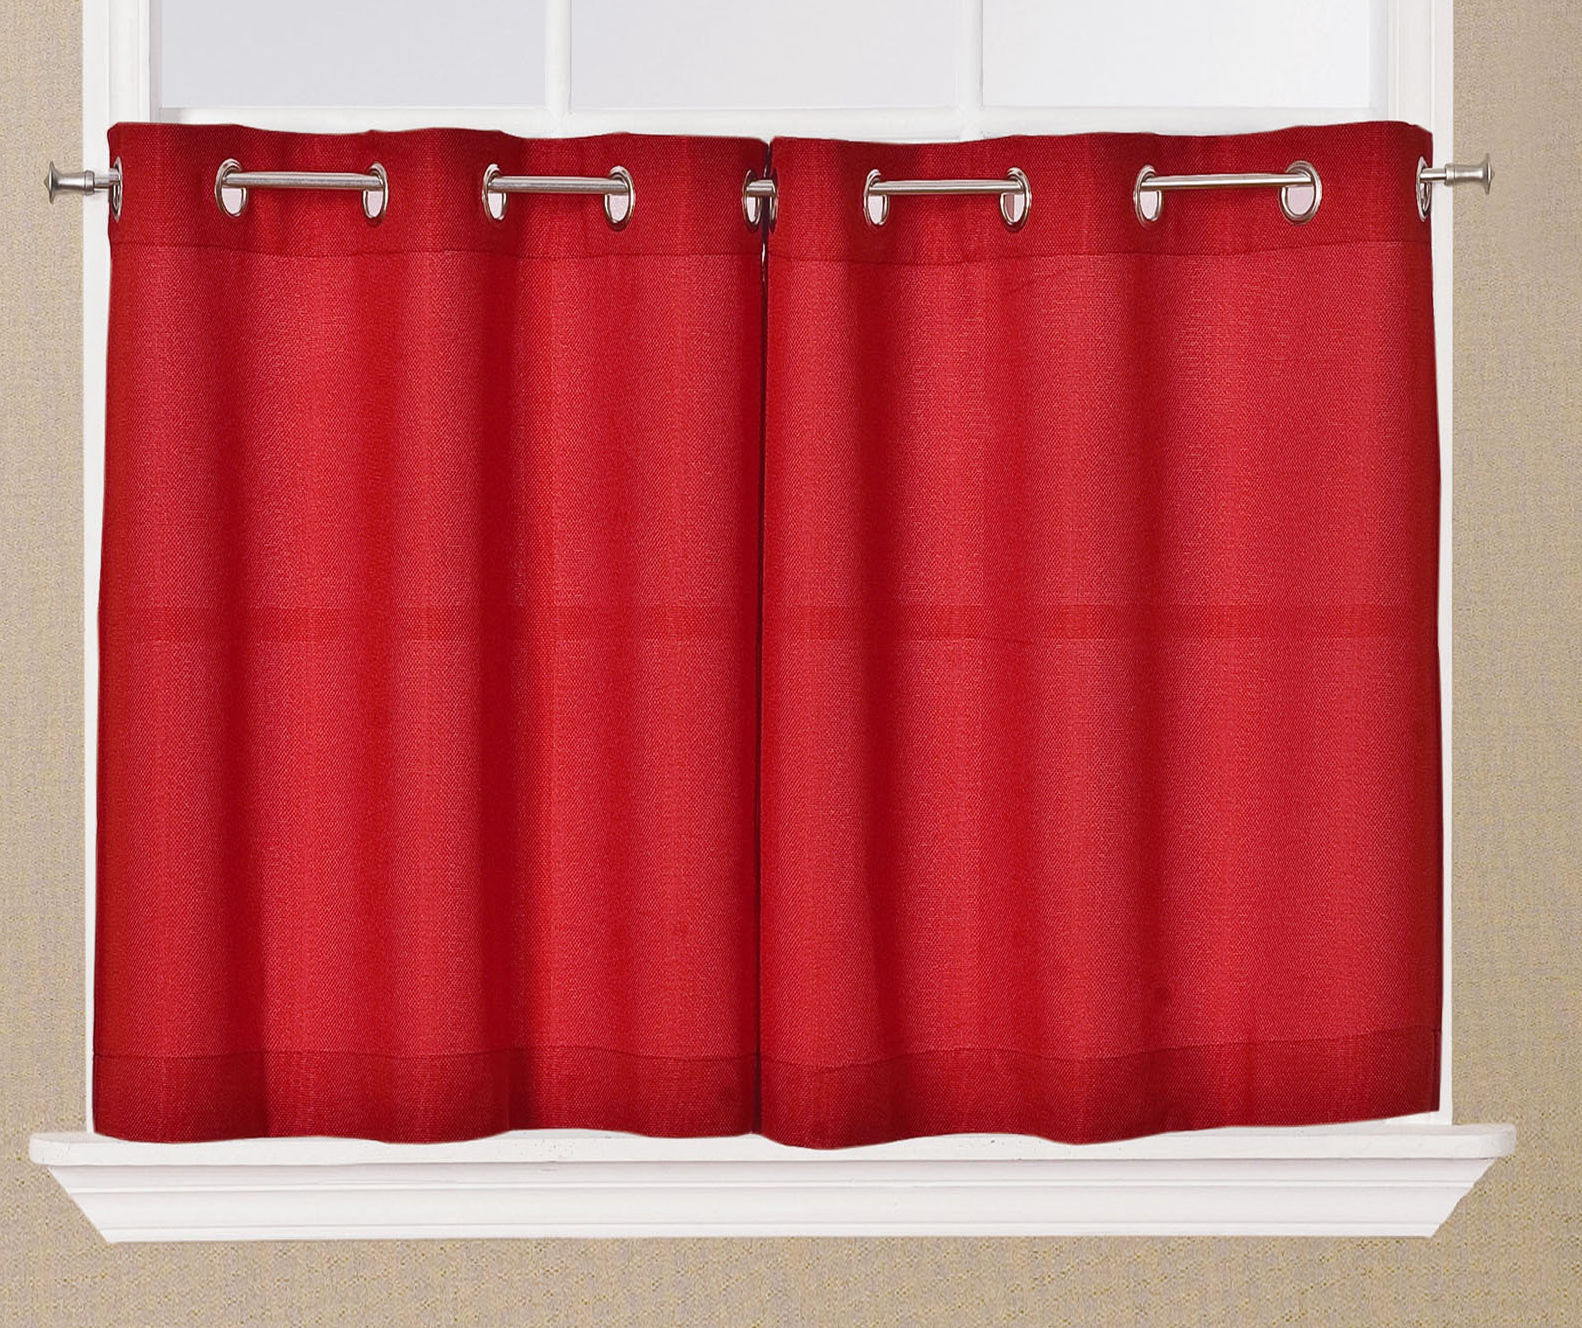 Red Kitchen Curtains
 Jackson Textured Solid Red Kitchen Curtain Choice Tiers or